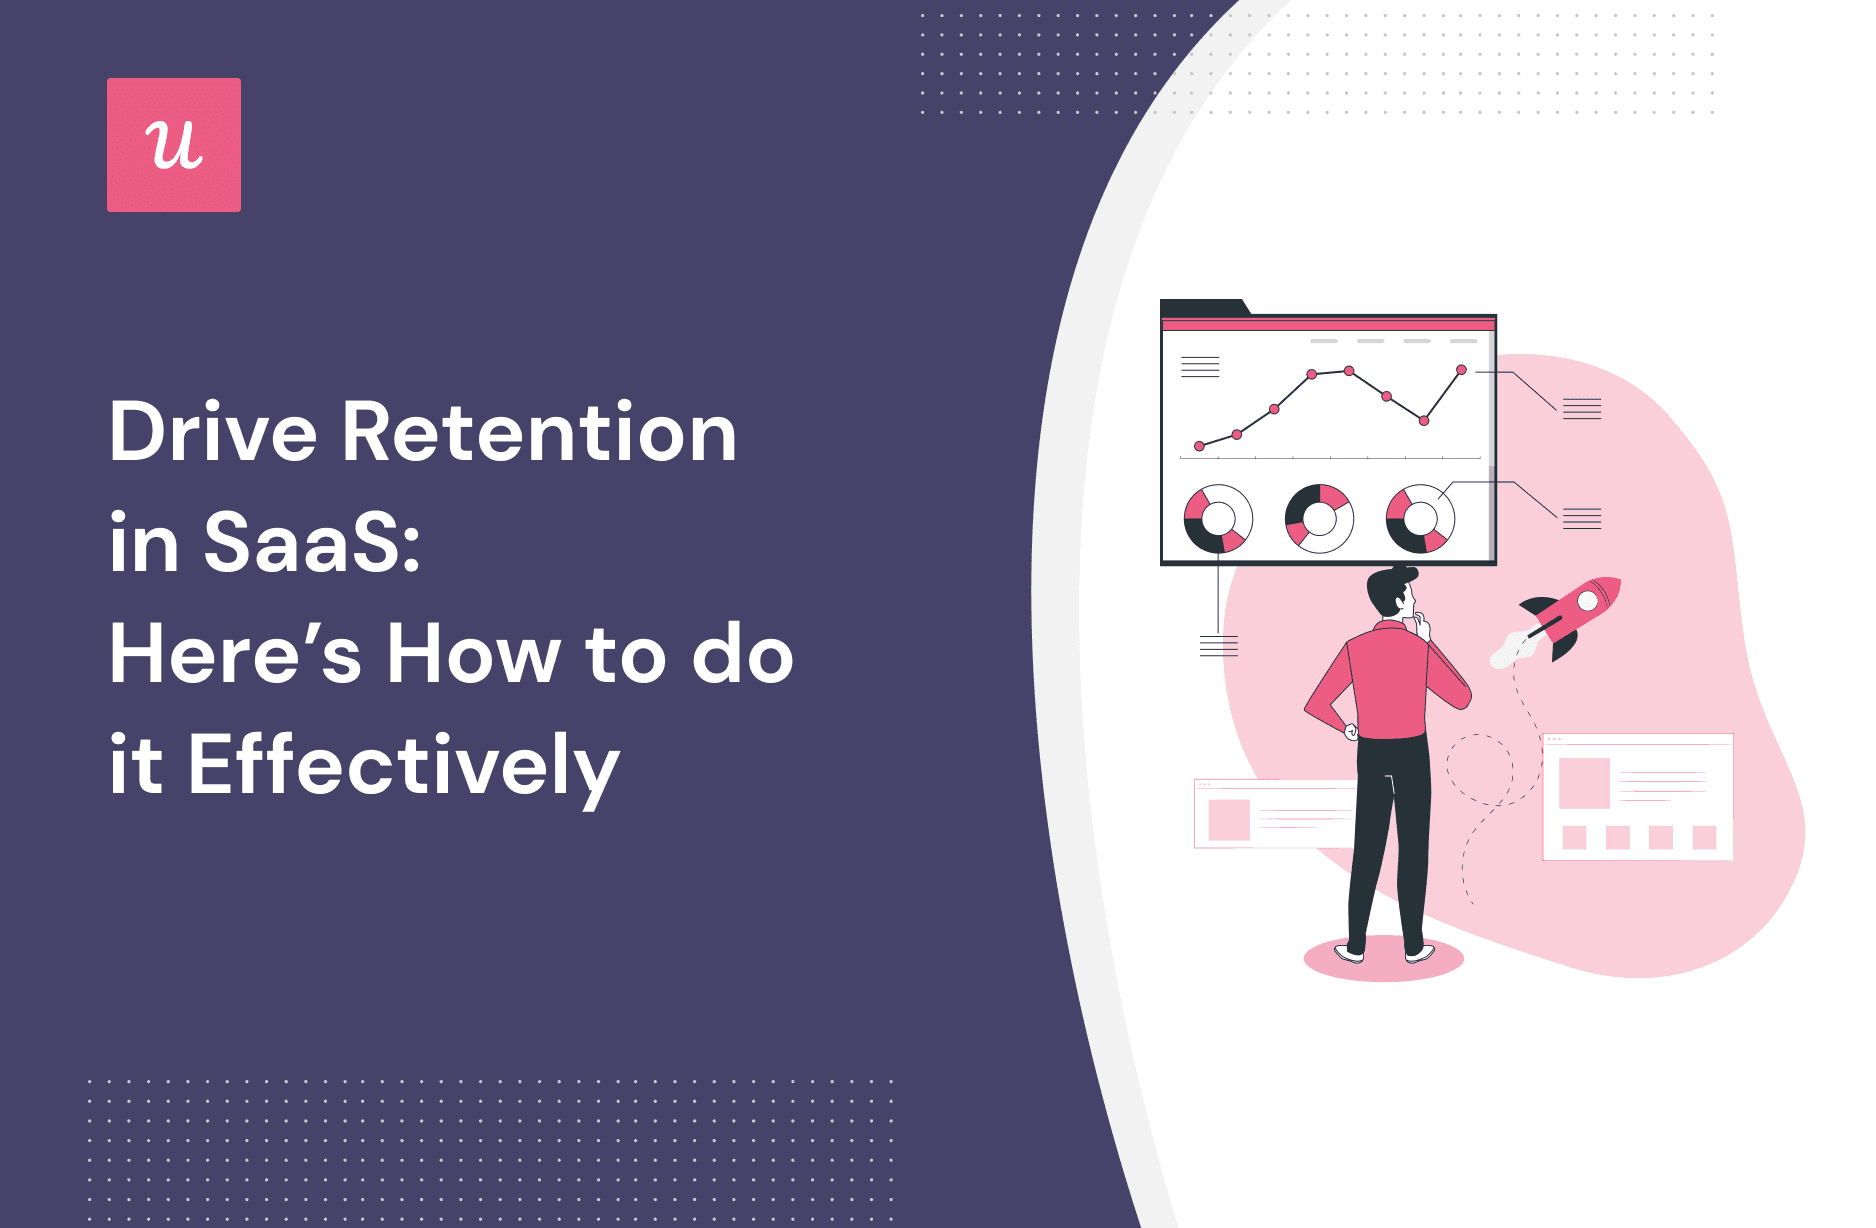 Drive Retention in SaaS: Here’s How to Do It Effectively cover